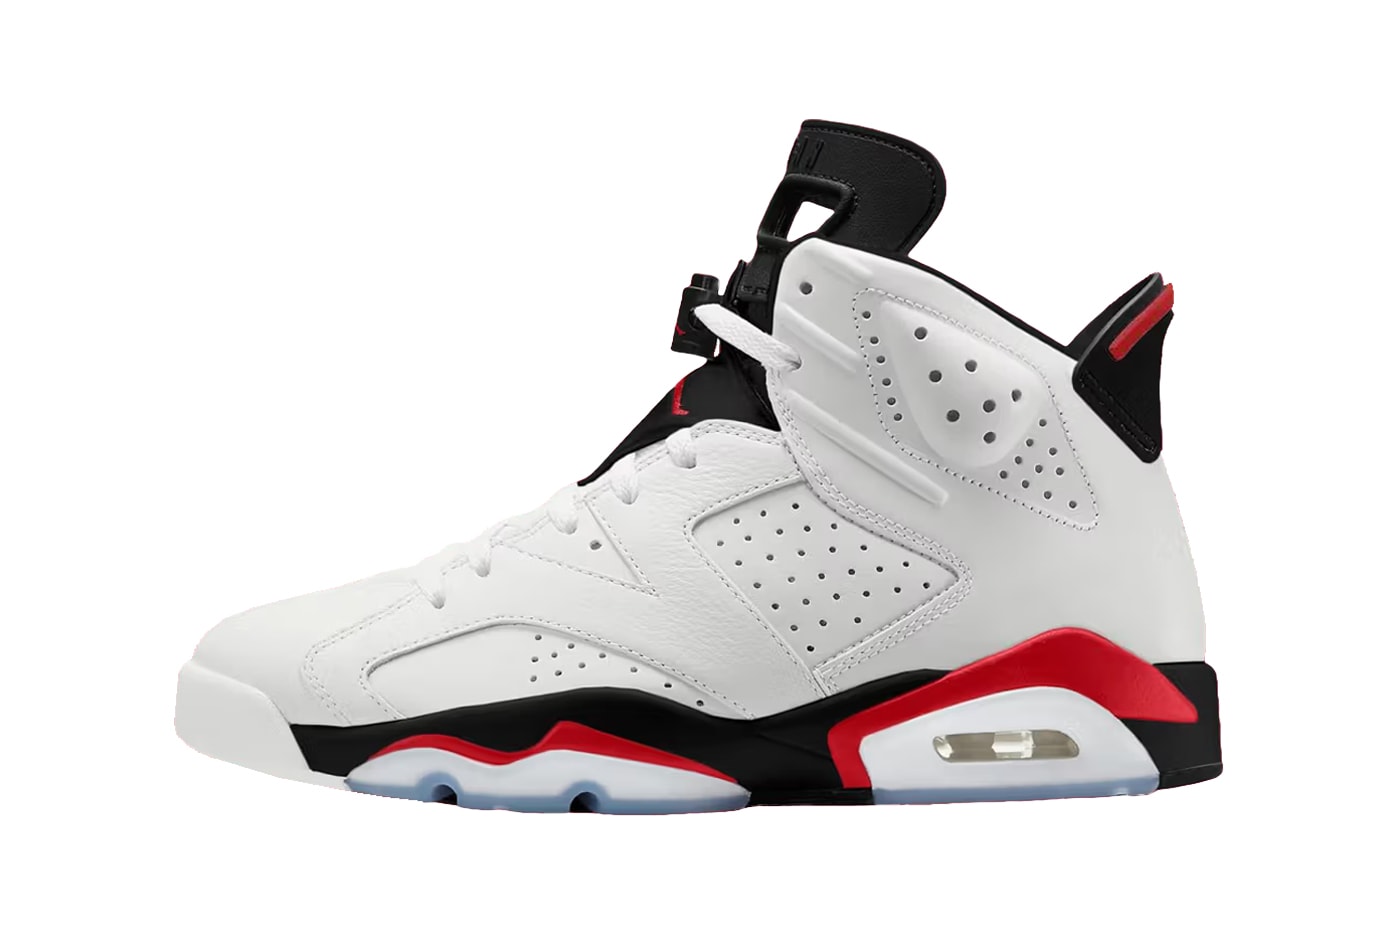 Air Jordan 6 White Fire Red CT8529-120 Release Info date store list buying guide photos price